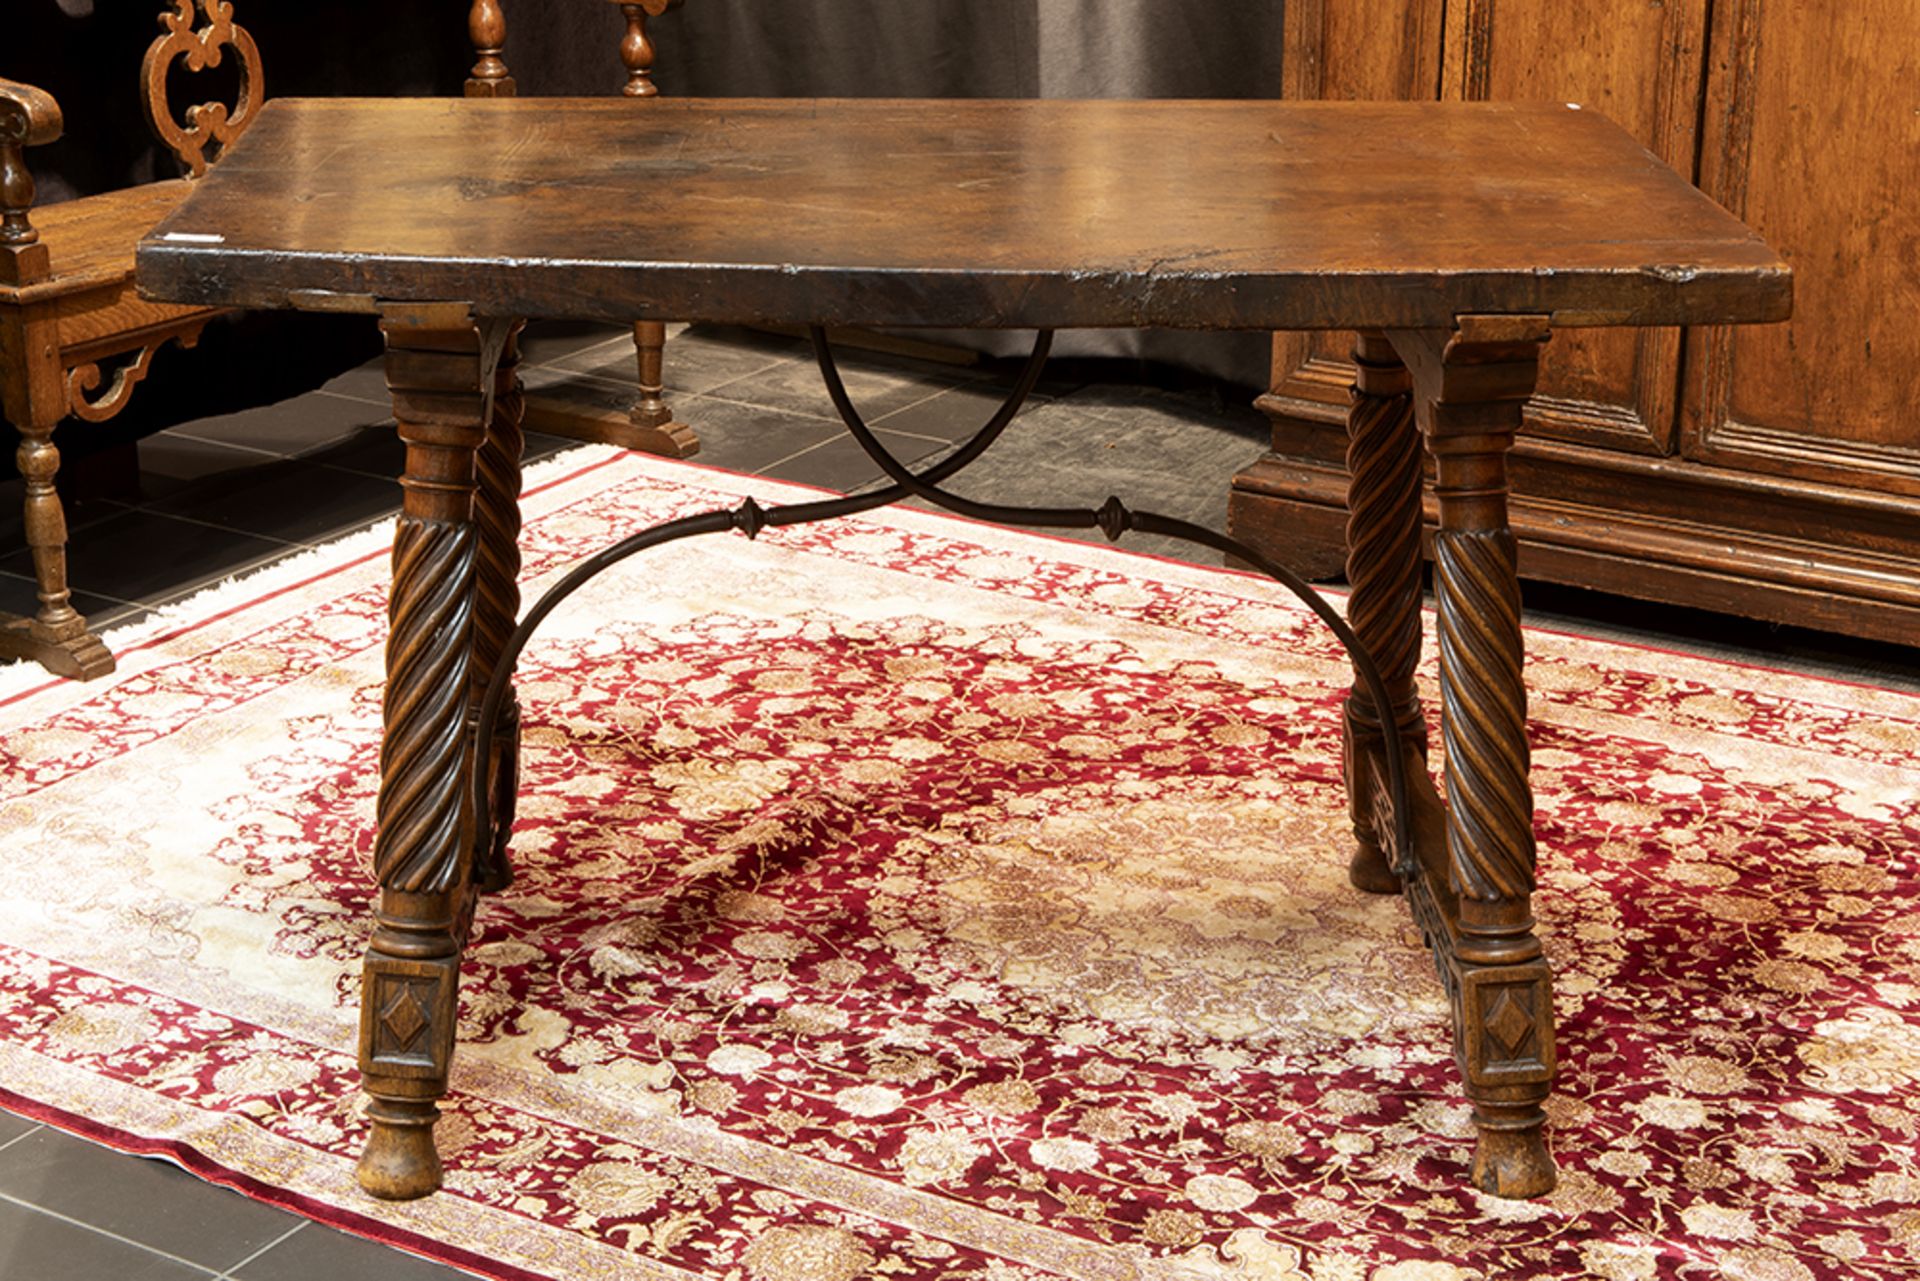 17th Cent. Spanish table in walnut with a typical iron connection between the legs || Zeventiende